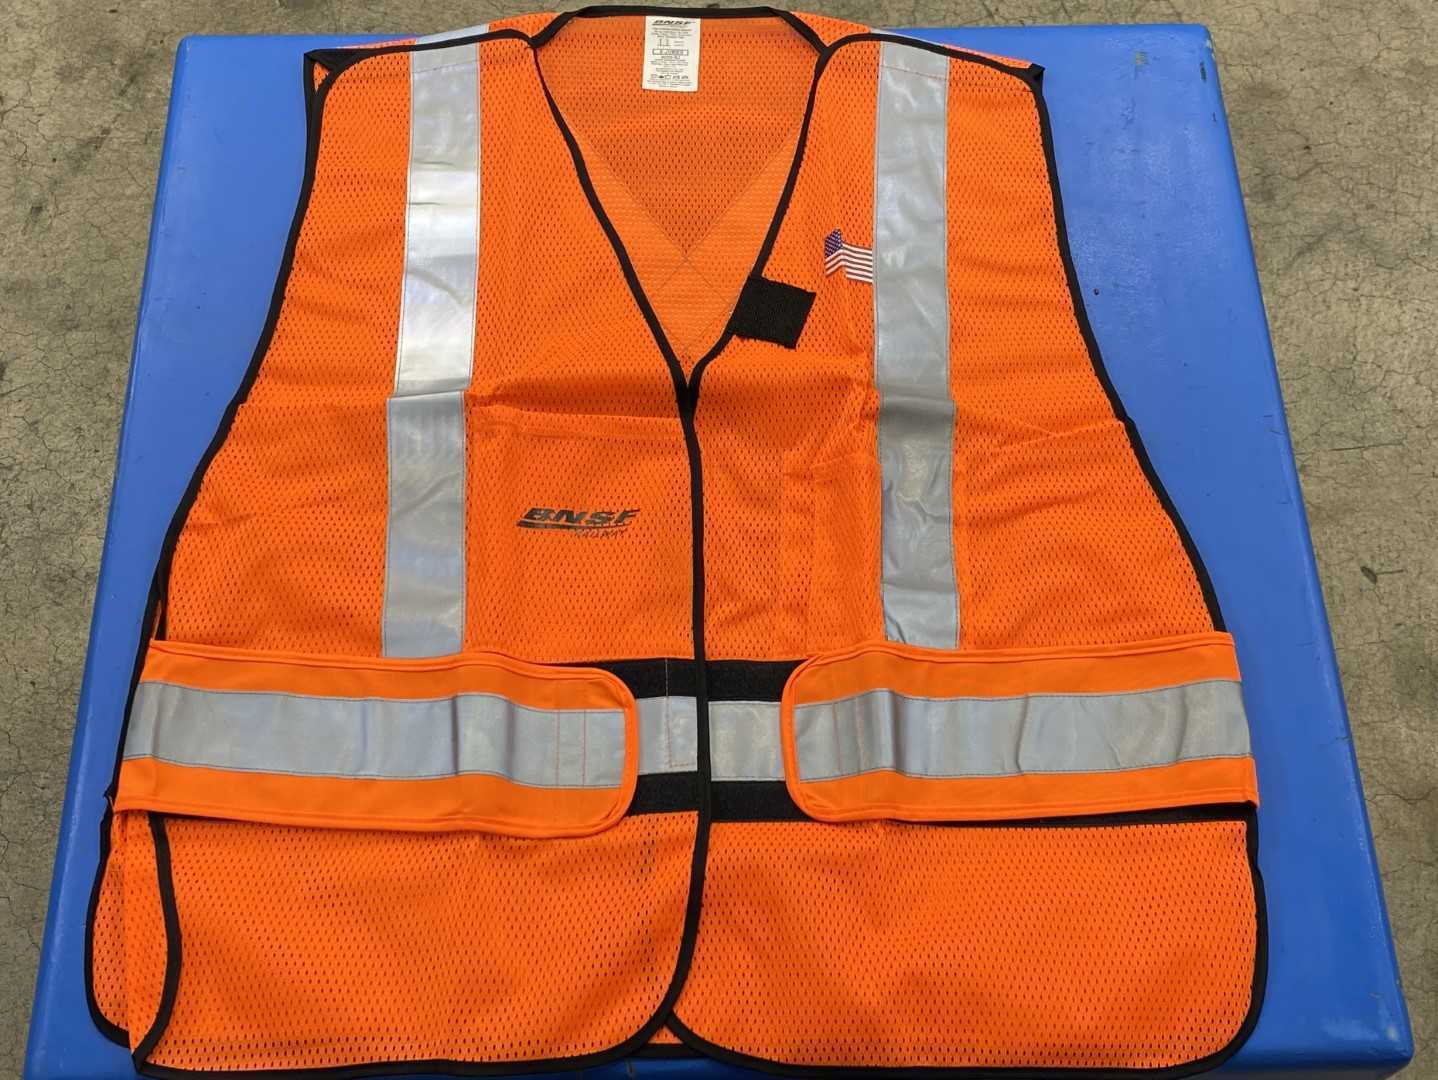 NEW in BOX BNSF Railway Safety Vest X-Large (Super Jumbo )